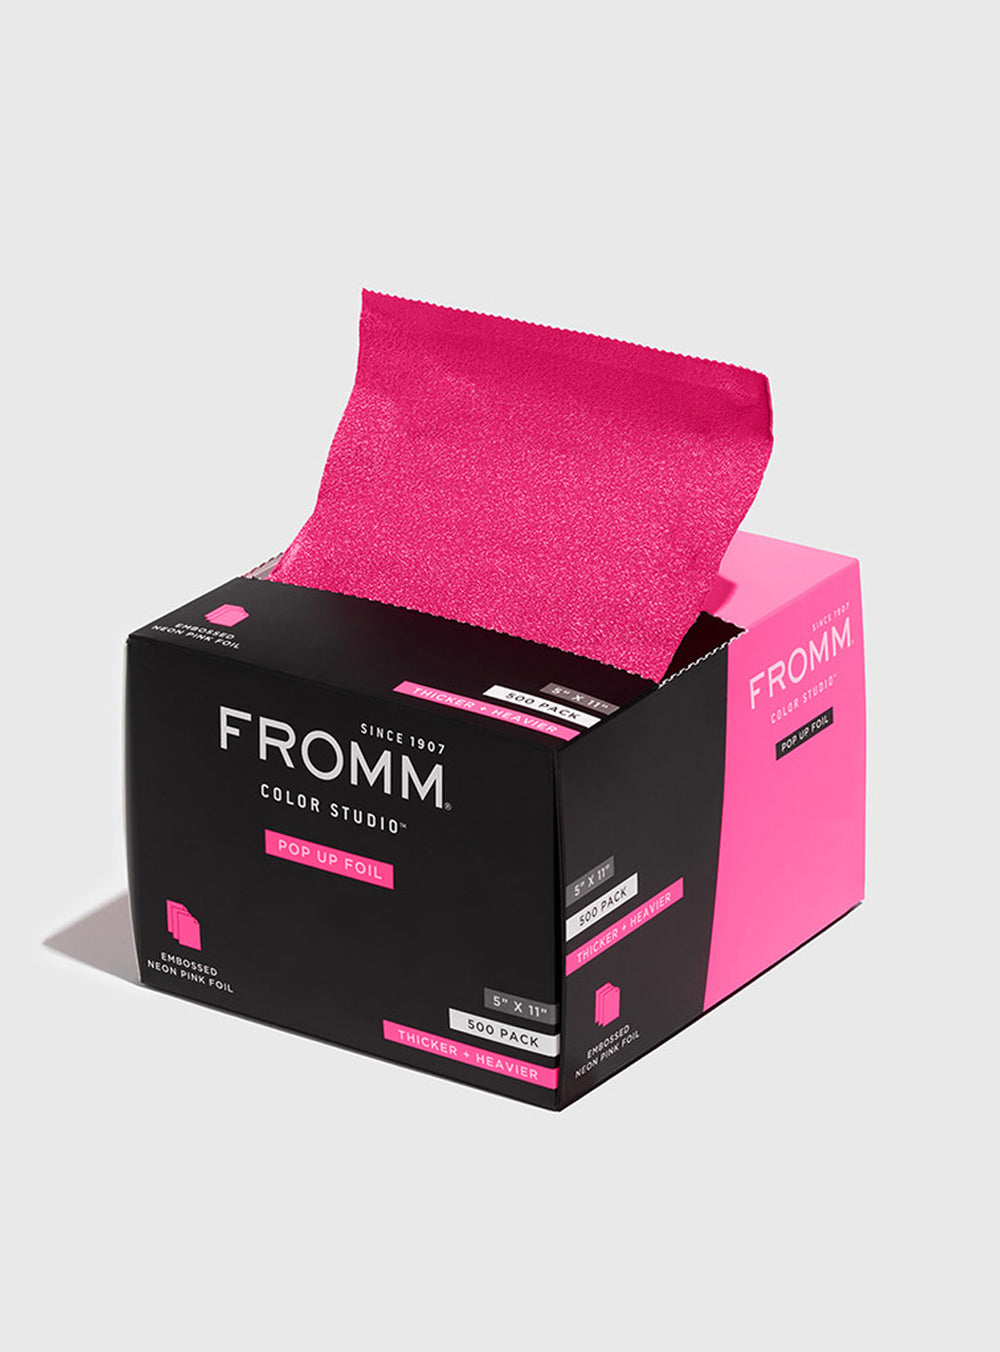 Fromm Pop Up Foil 5 in x 11 inch 500 CountHair Color AccessoriesFROMMColor: Hot Pink